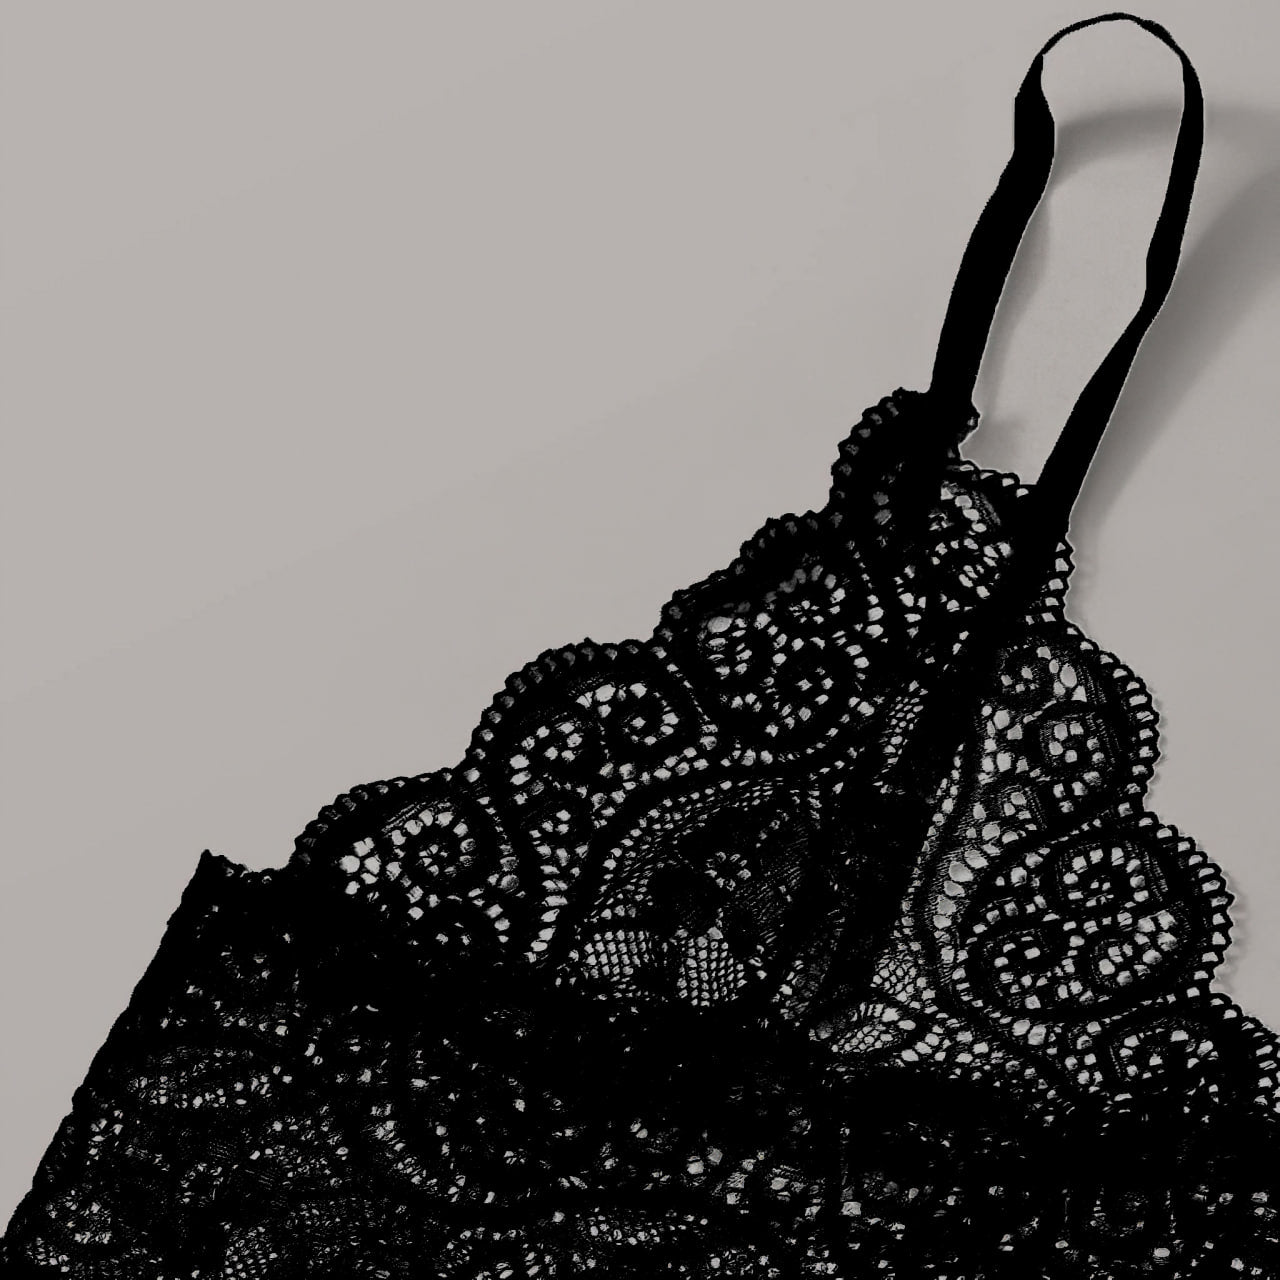 A gothic lingerie set featuring a red skull design on a black lace background.